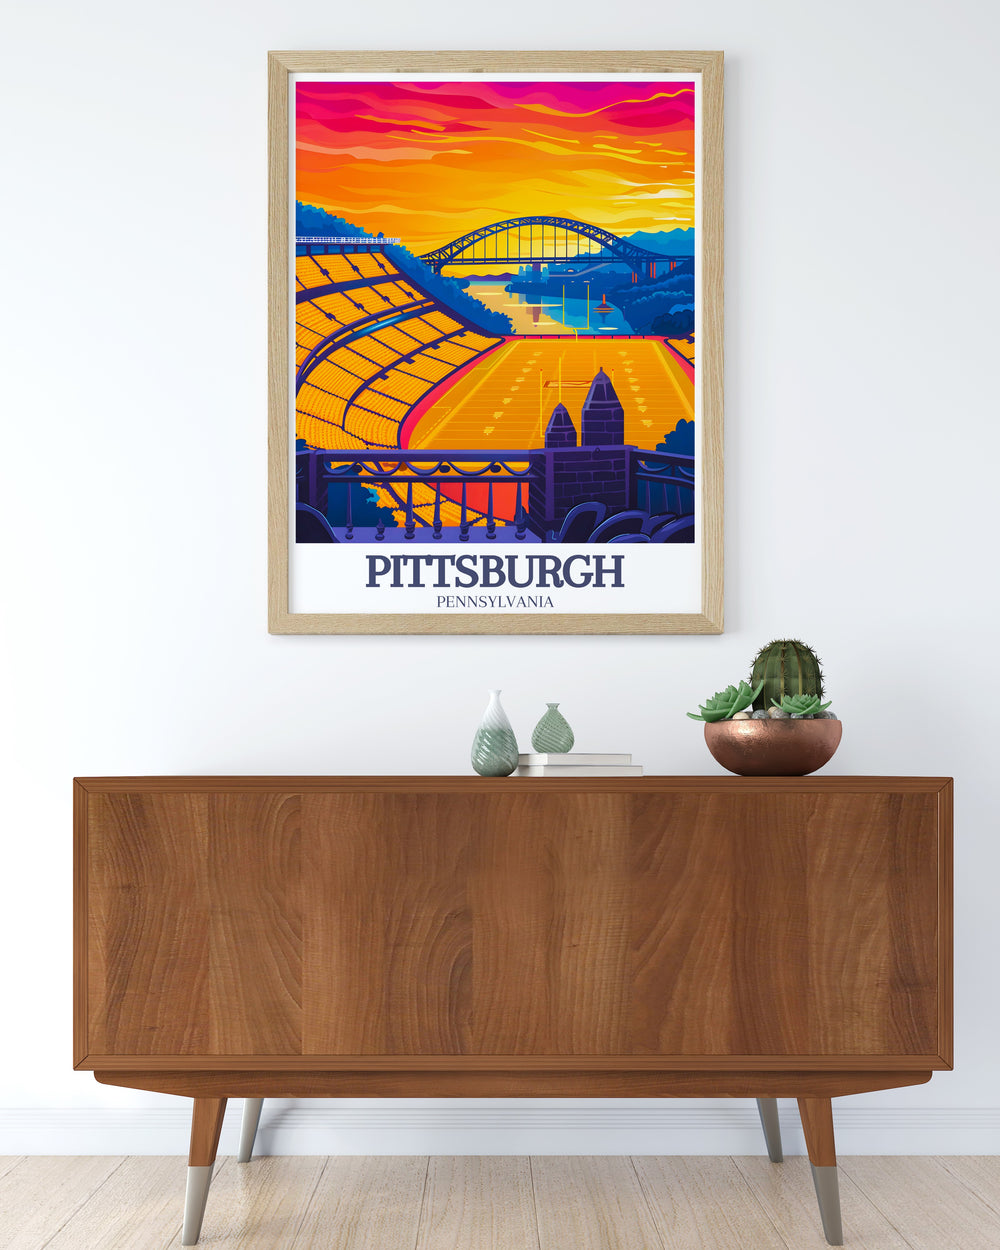 Elevate your home decor with a beautiful Pittsburgh wall art print showcasing Fort Pitt Bridge and Heinz Field. This city art print is ideal for those who love Pittsburghs architecture and landmarks adding a touch of elegance and sophistication to any room.